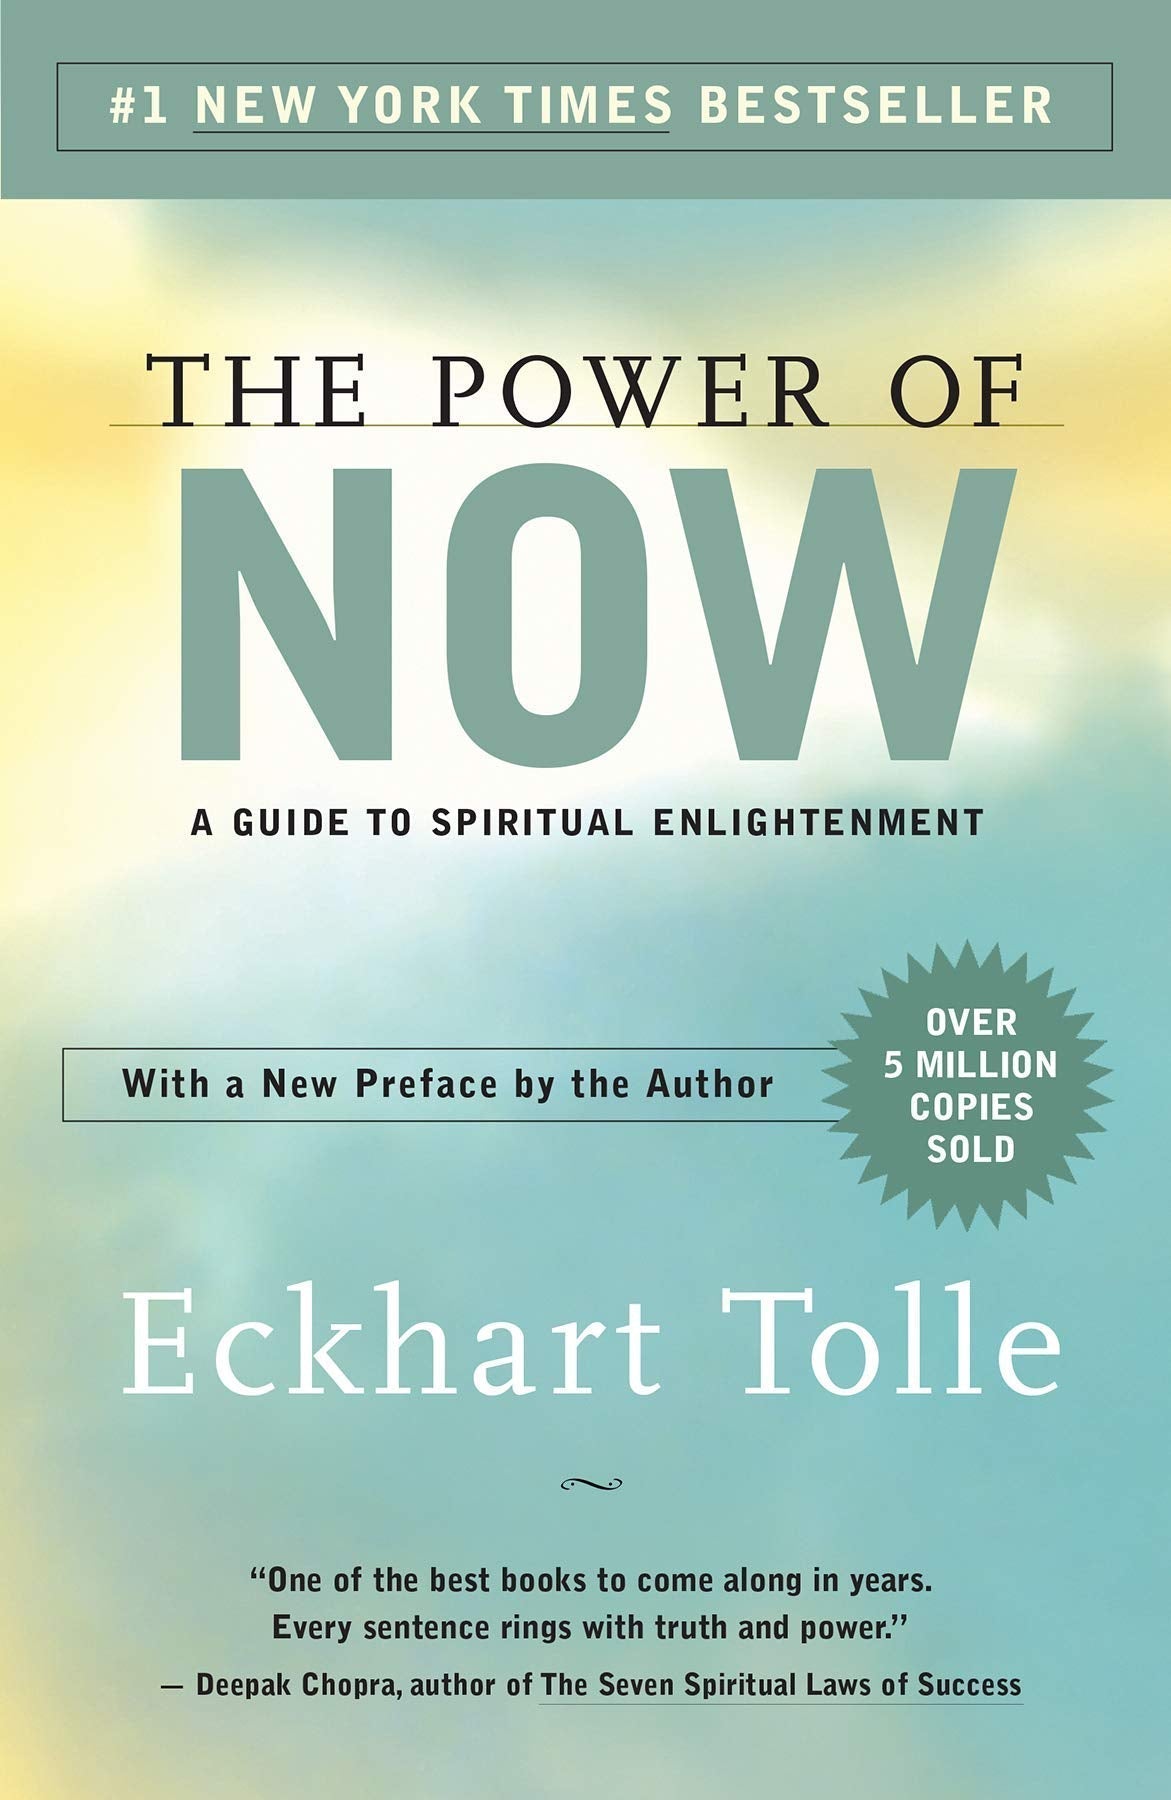 Power of Now: A Guide to Spiritual Enlightenment, by Eckhart Tolle - Premium Books from Ingram Book Company - Just $17! Shop now at Choices Books & Gifts